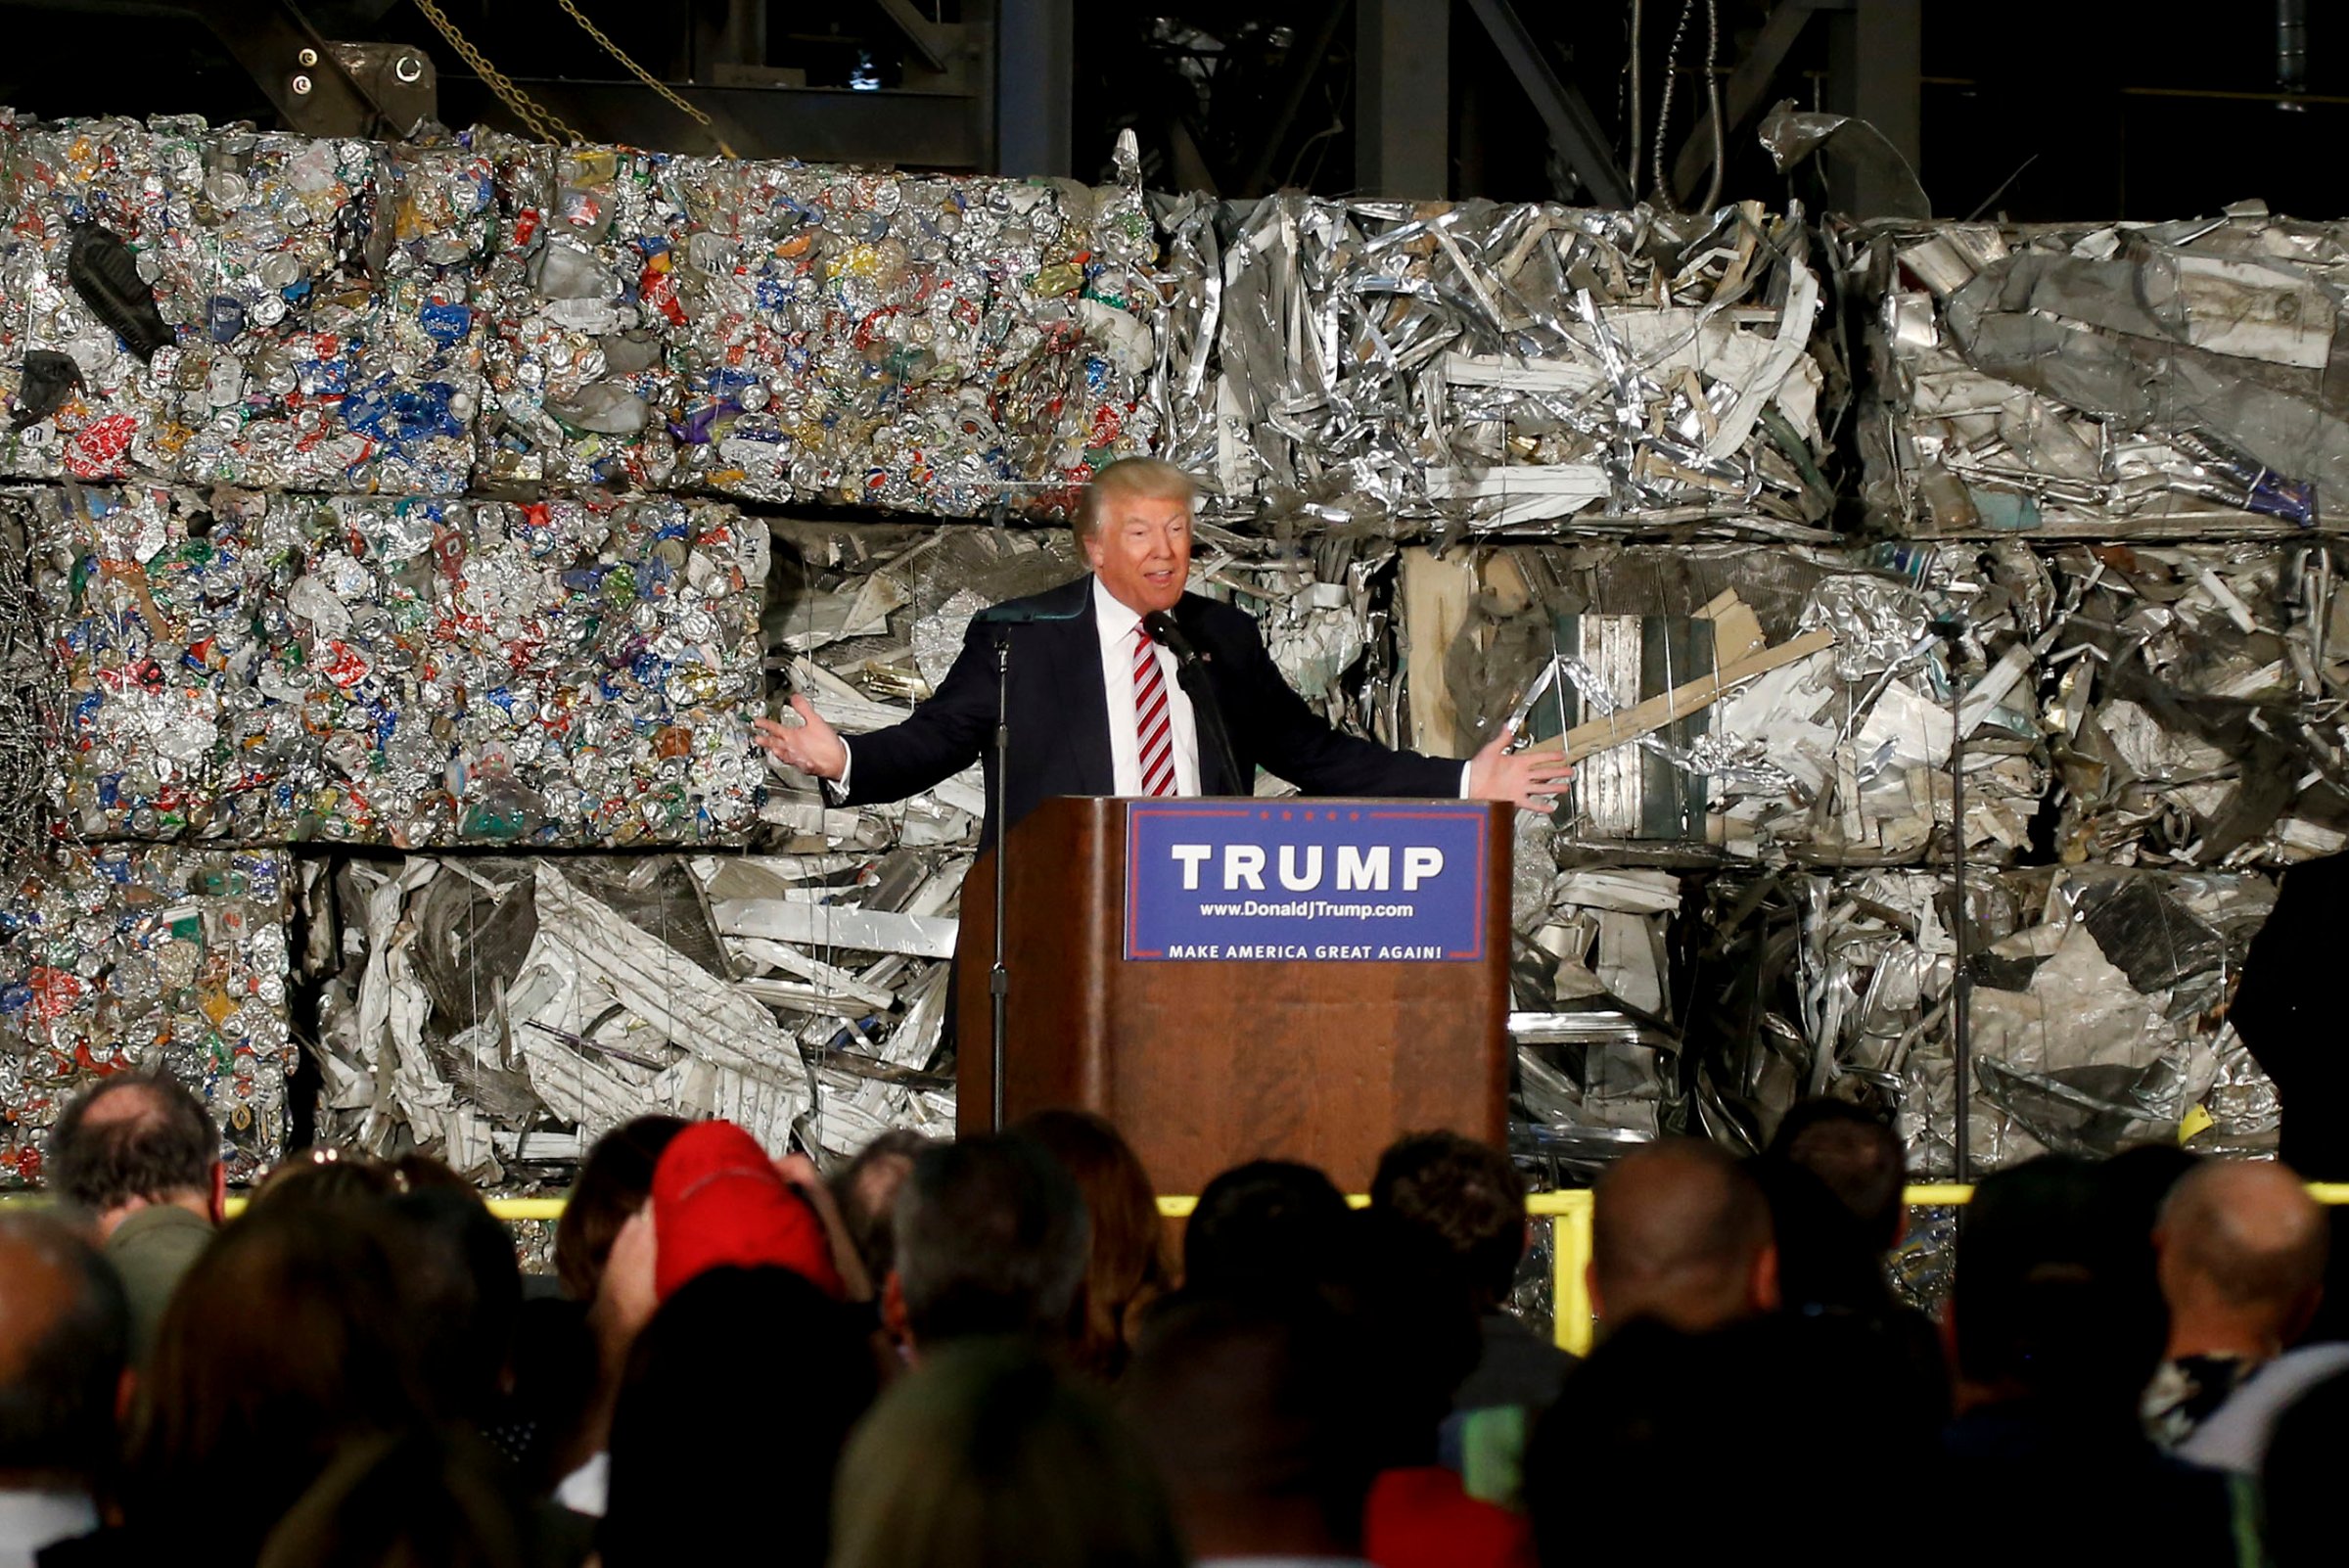 Donald Trump speaks during a campaign stop at Alumisource, a metals recycling facility in Monessen, PA, June 28, 2016.